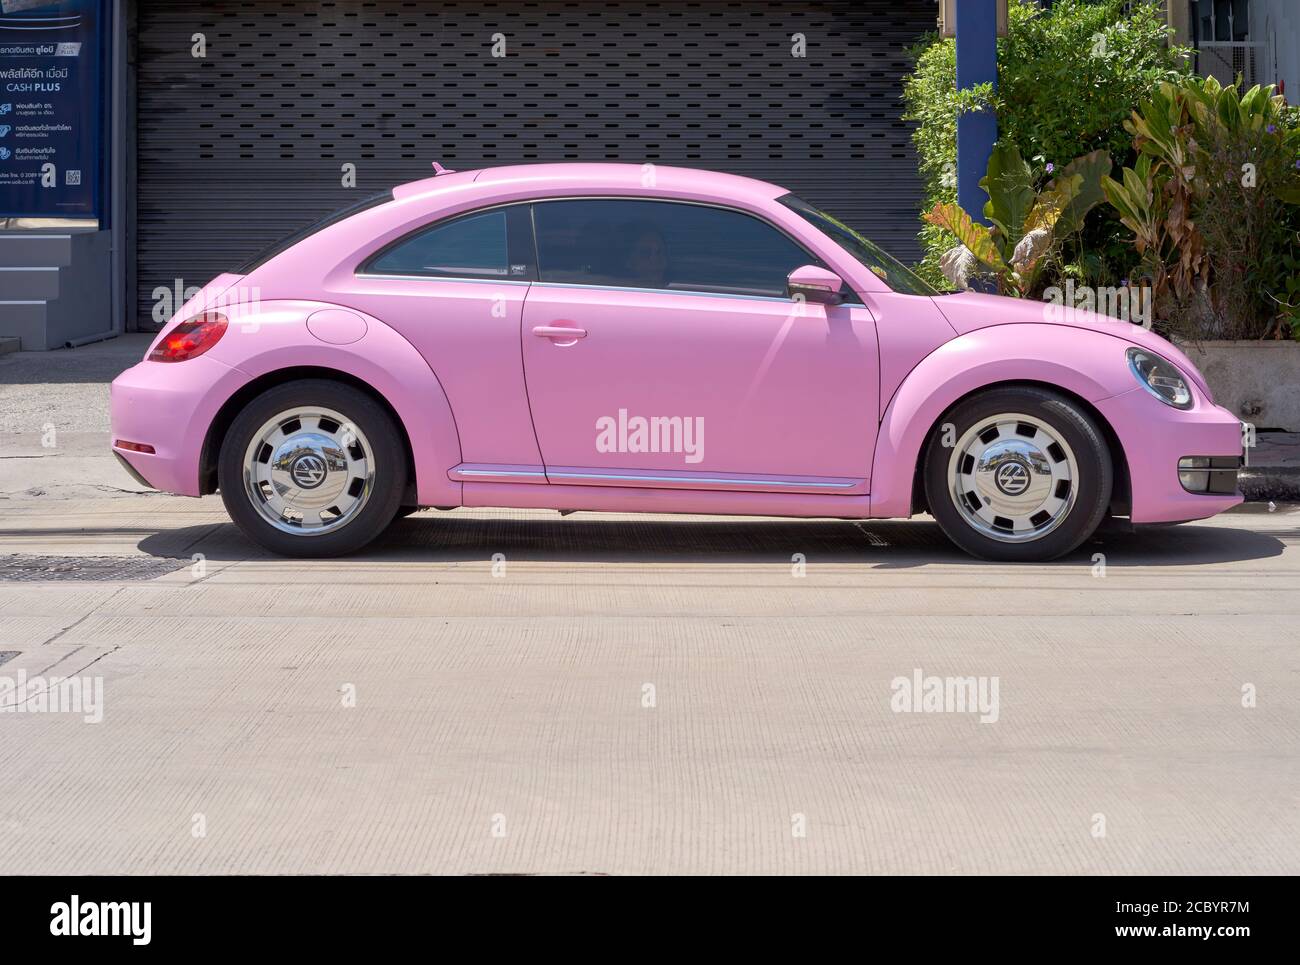 Volkswagen Beetle pink modern VW car. Thailand S. E. Asia. Pink classic car  Stock Photo - Alamy